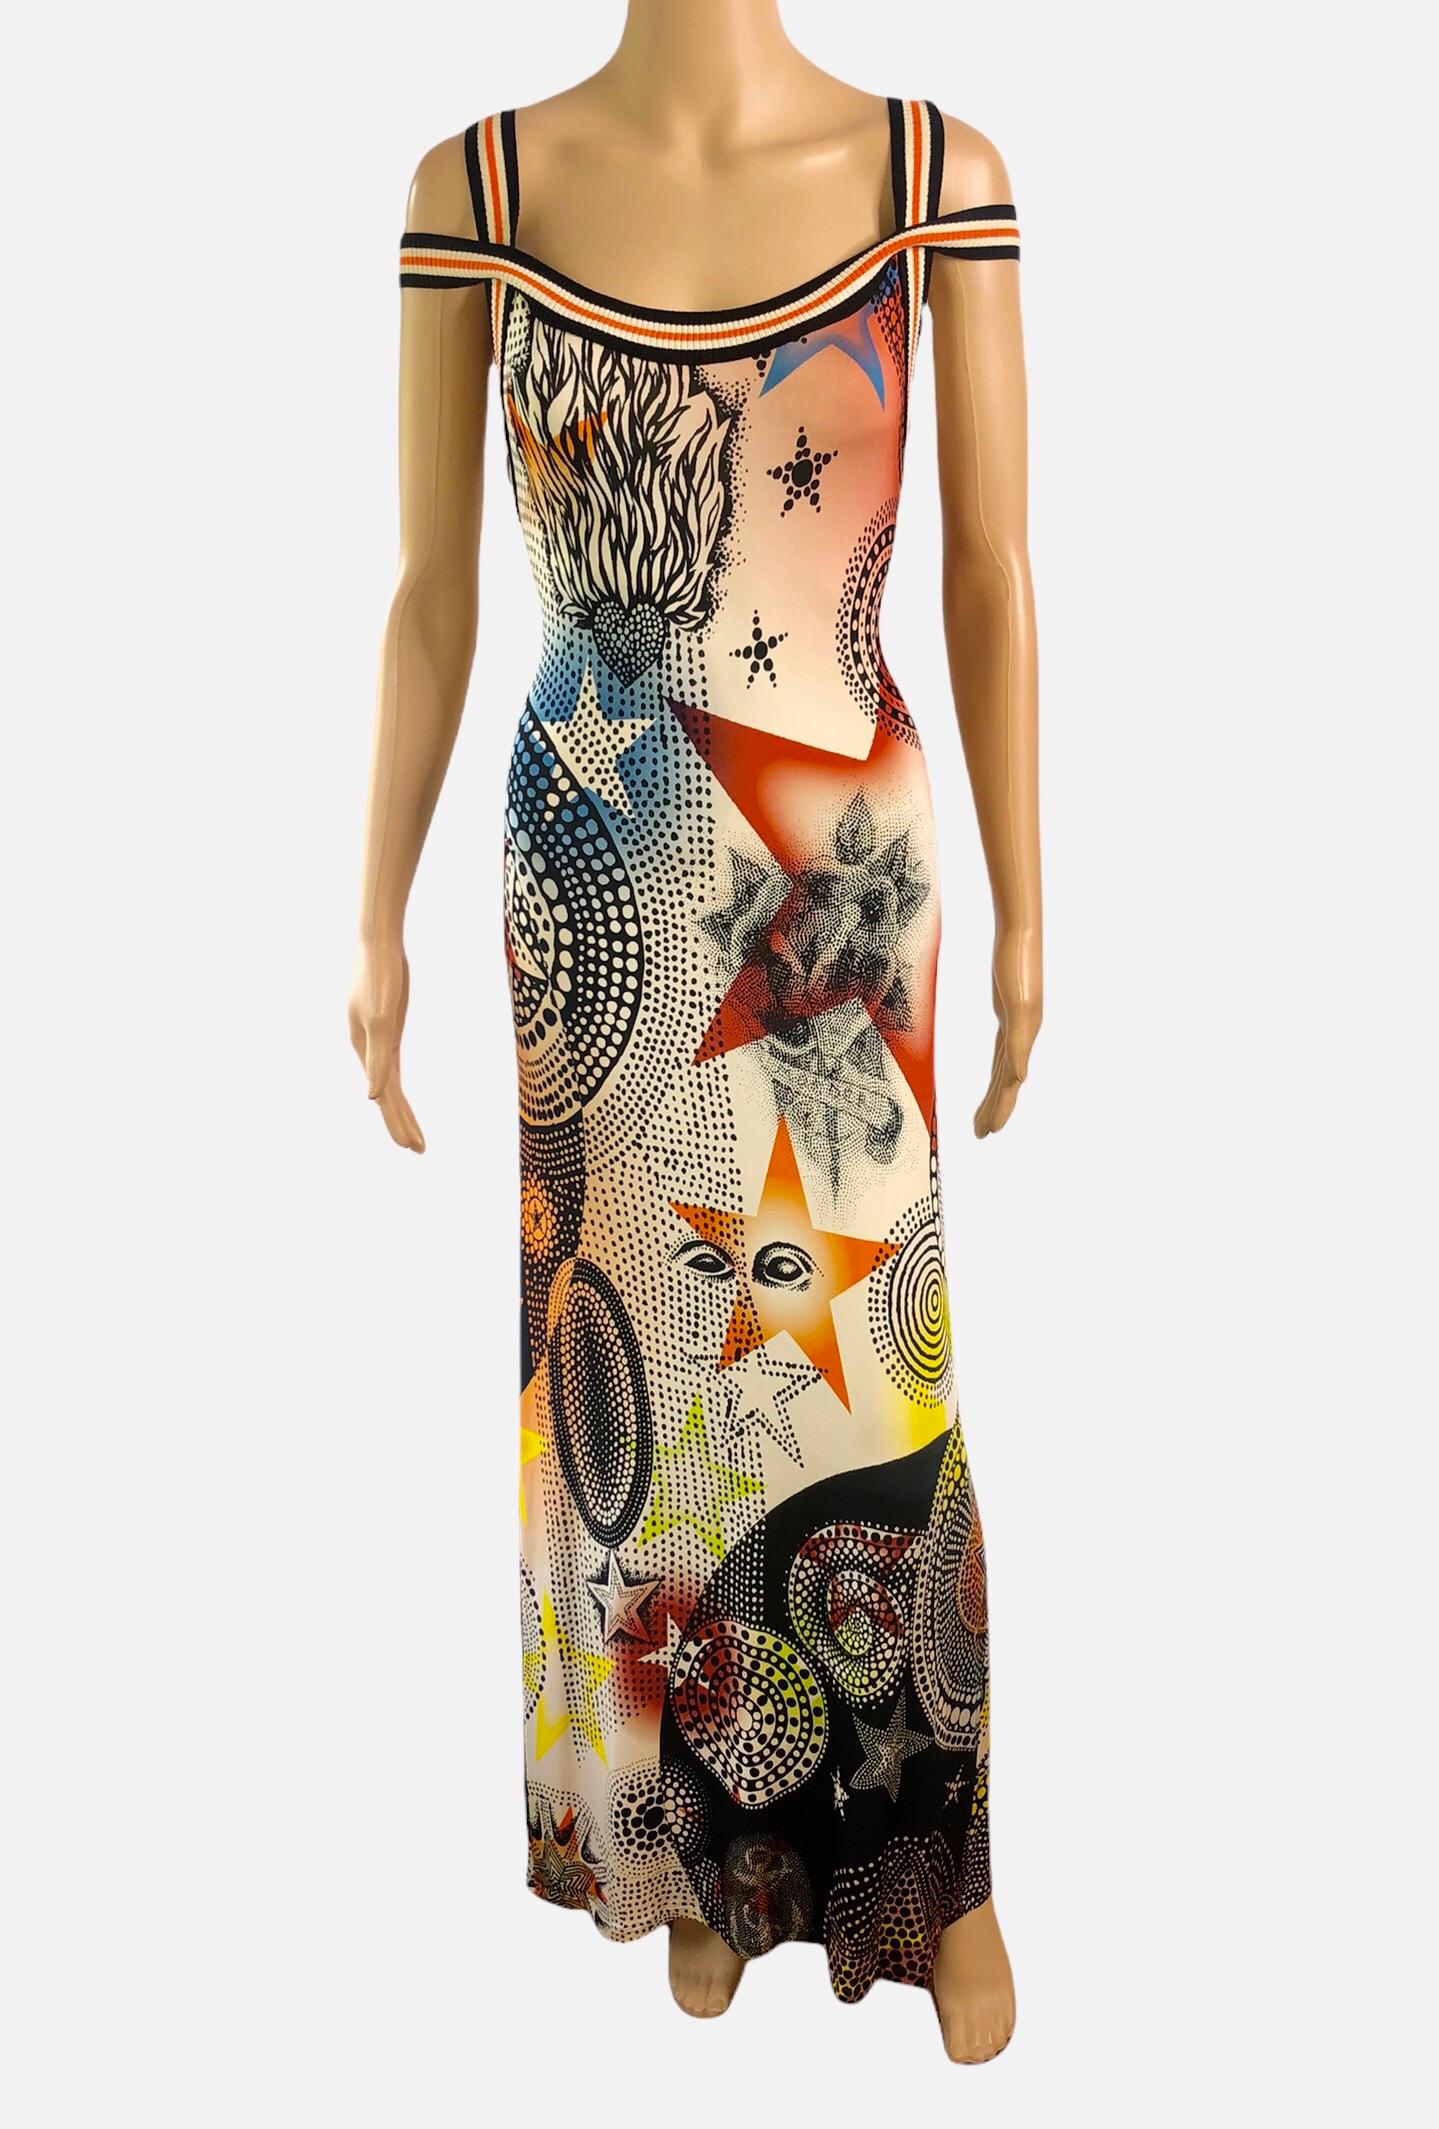 Jean Paul Gaultier S/S 2007 Star Print Cutout Bodycon Maxi Dress In Good Condition In Naples, FL